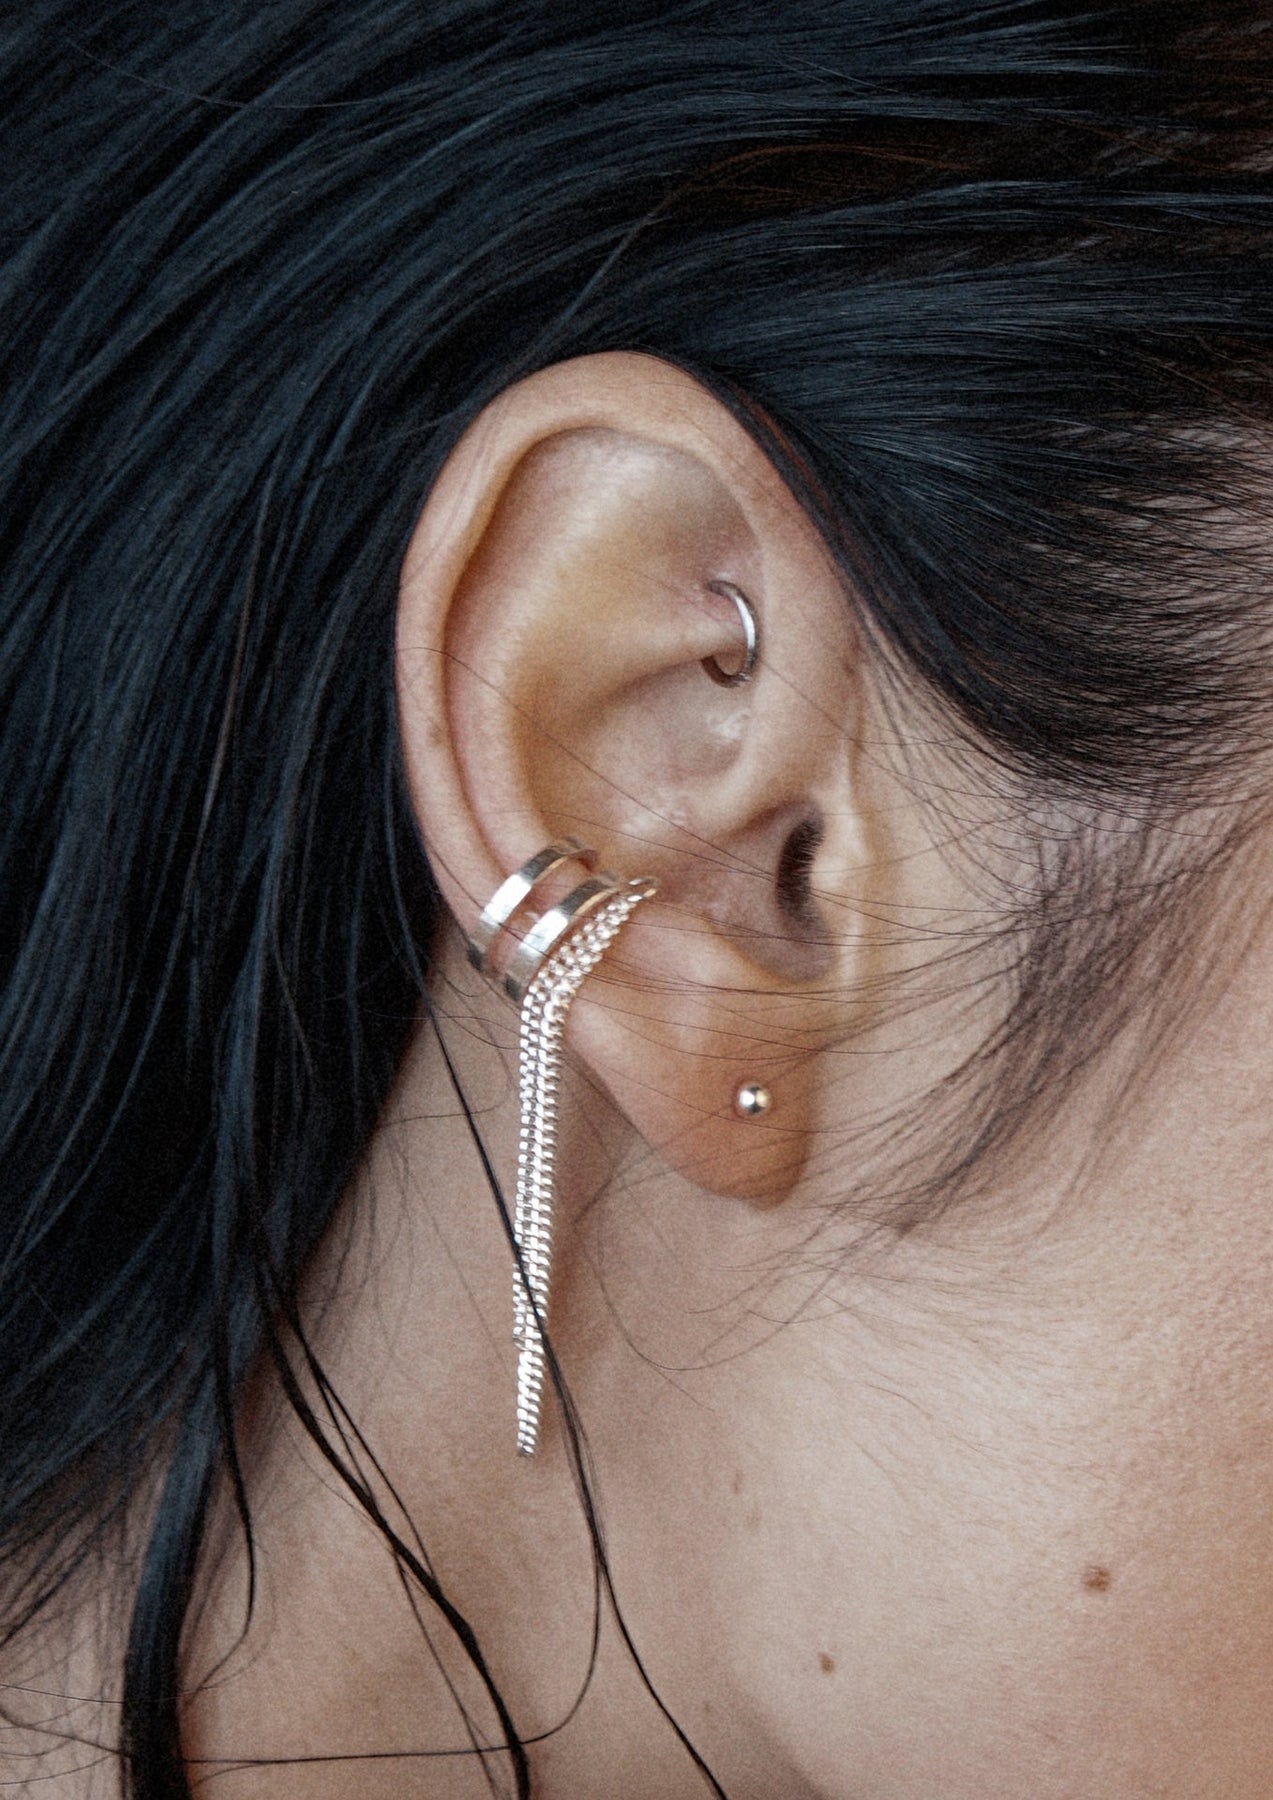 Close-up of Revolve Ear Cuff in sterling silver, featuring a double chain design. Handcrafted accessory for non-pierced ears, with a sleek, edgy look.